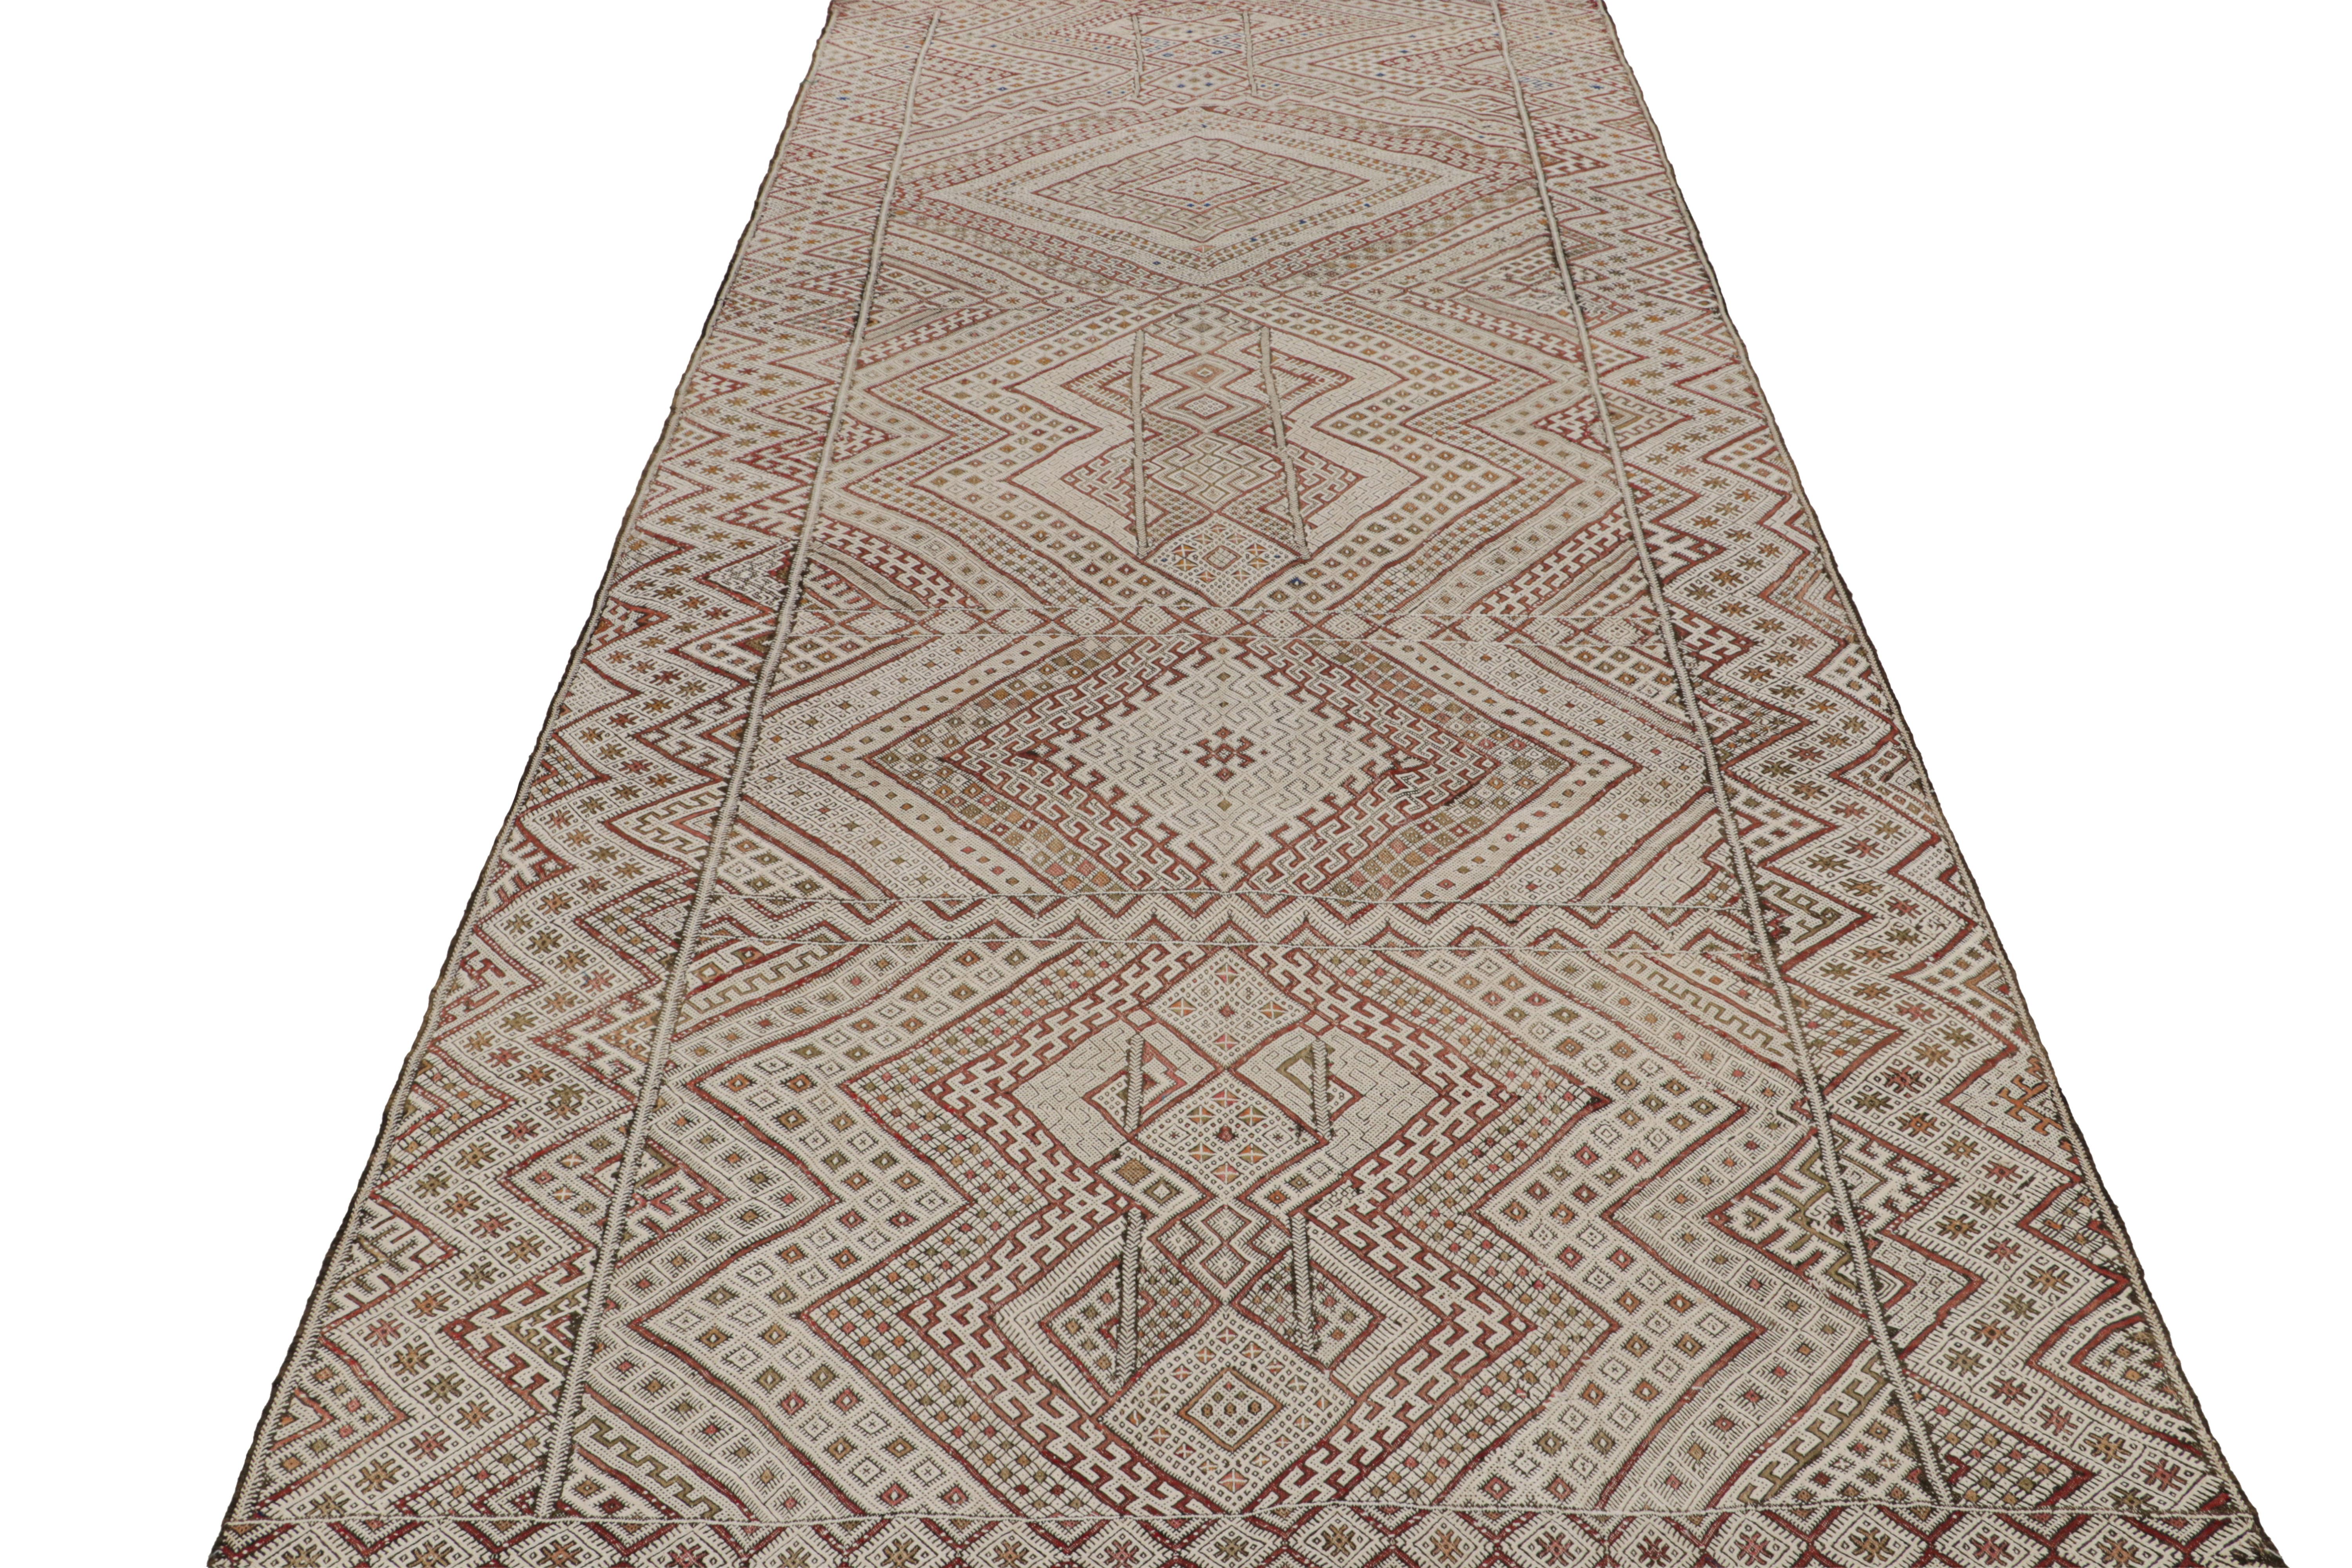 Hand-Knotted Vintage Zayane Moroccan Kilim in White & Brown Tribal Patterns by Rug & Kilim For Sale